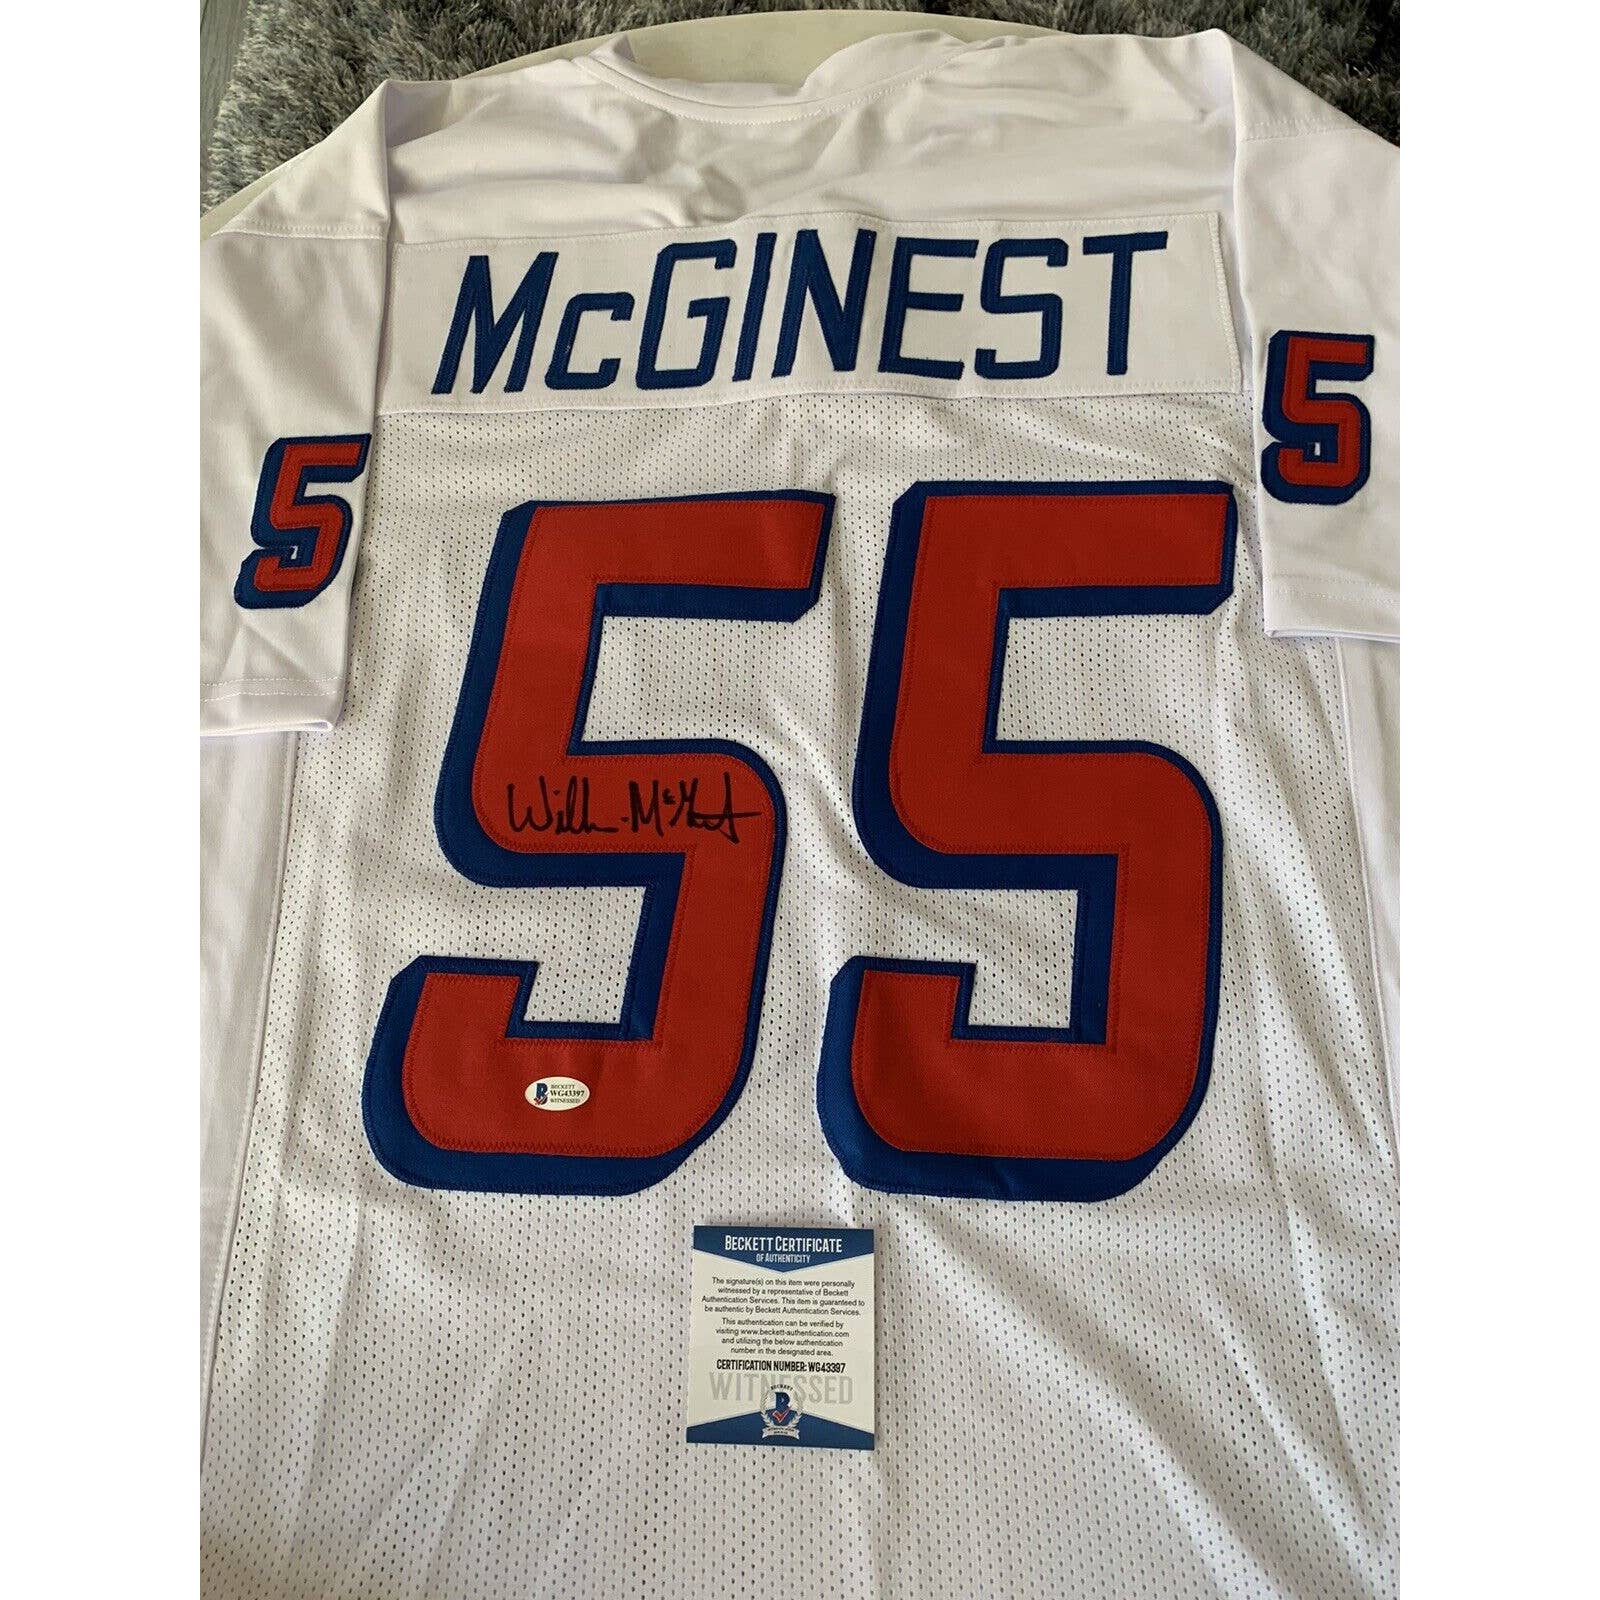 Willie McGinest Autographed/Signed Jersey Beckett COA New England Patriots - TreasuresEvolved